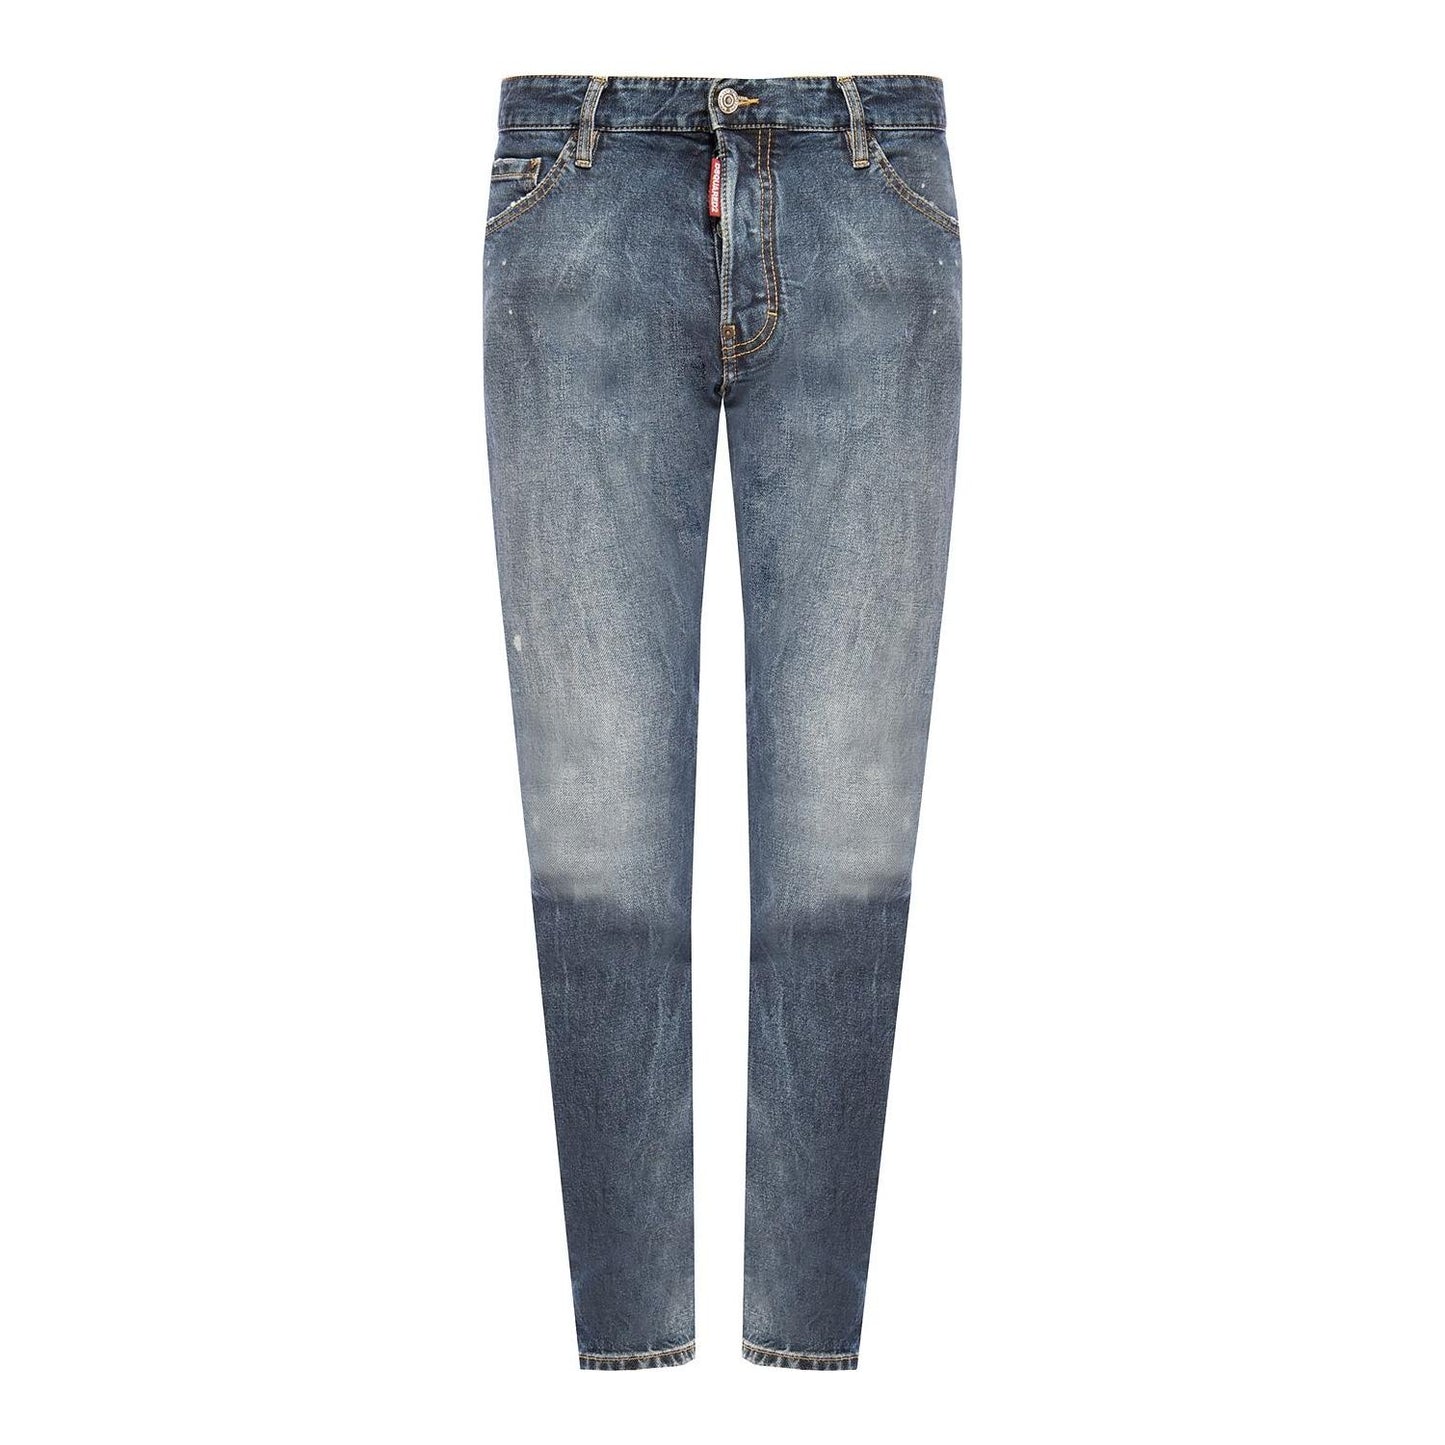 Dsquared² Sleek Navy Distressed Cool Guy Jeans blue-cotton-jeans-pants-3